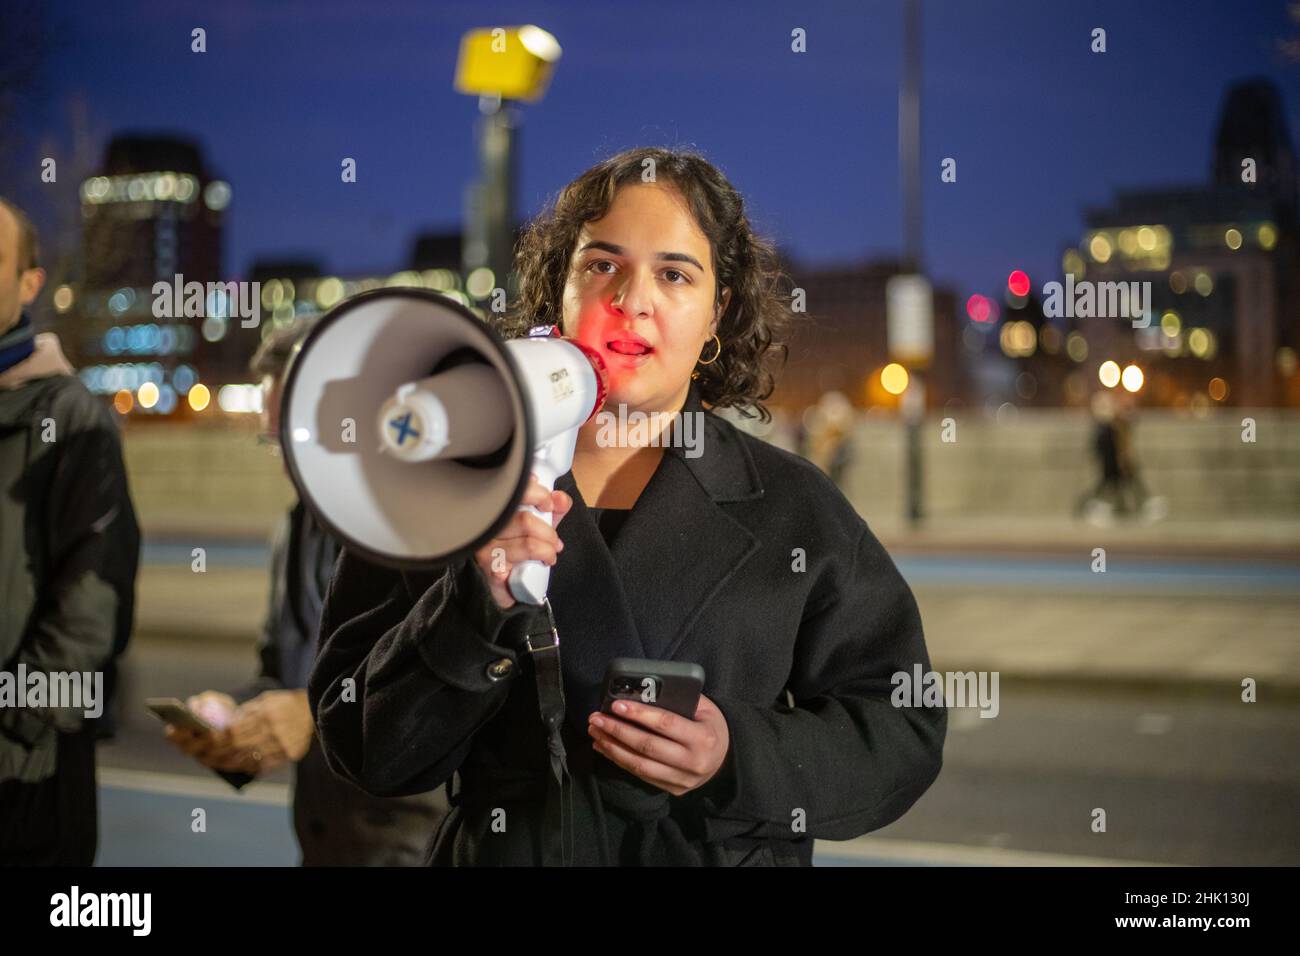 LONDON, JANUARY 31 2022, MP Nadia Whittome 'Russia Hands Off Ukraine Protest' outside of the RT news building a day before Prime Minister Boris Johnson flys to Kyiv to hold talks with President Volodymyr Zelenskiy as tensions between Russia and Ukraine builds Stock Photo